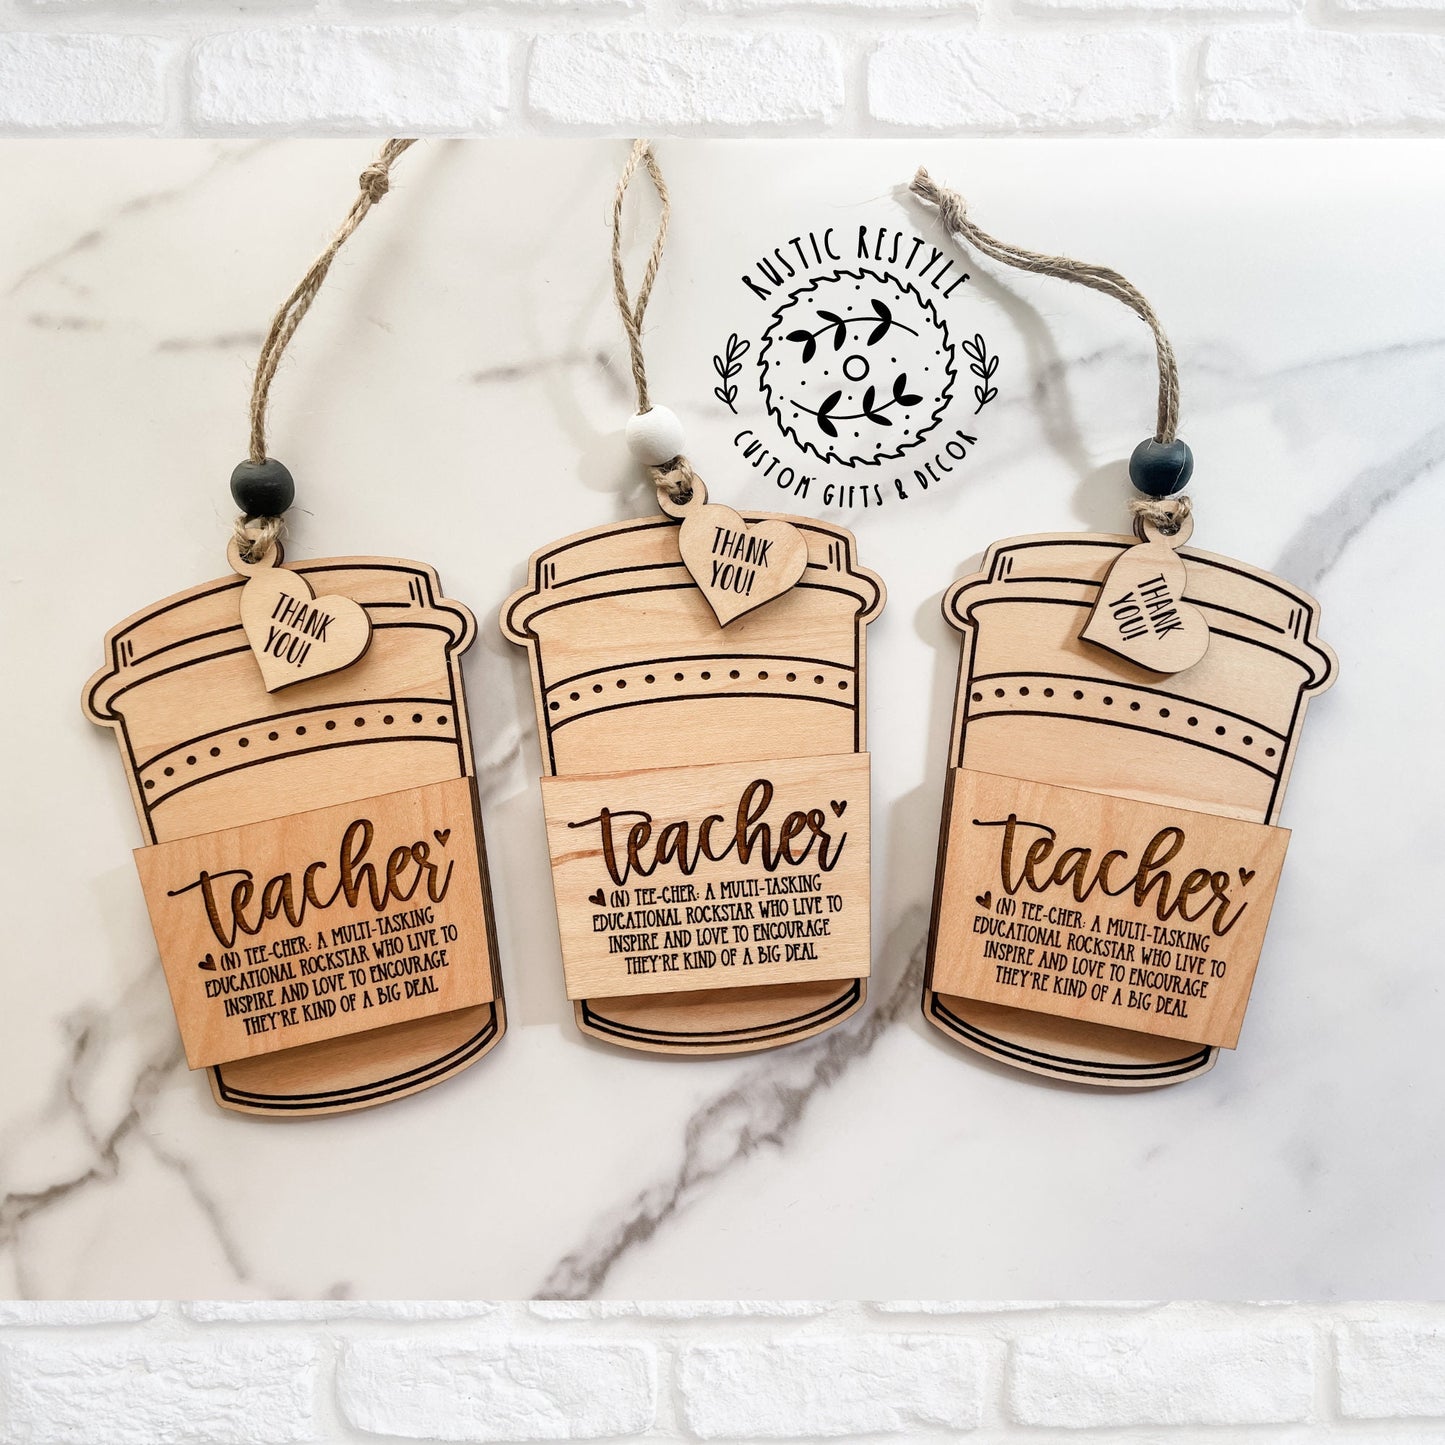 Teacher coffee cup ornament gift card holder Customizable Classroom decoration gift for teachers, paraeducators, and Daycare provider